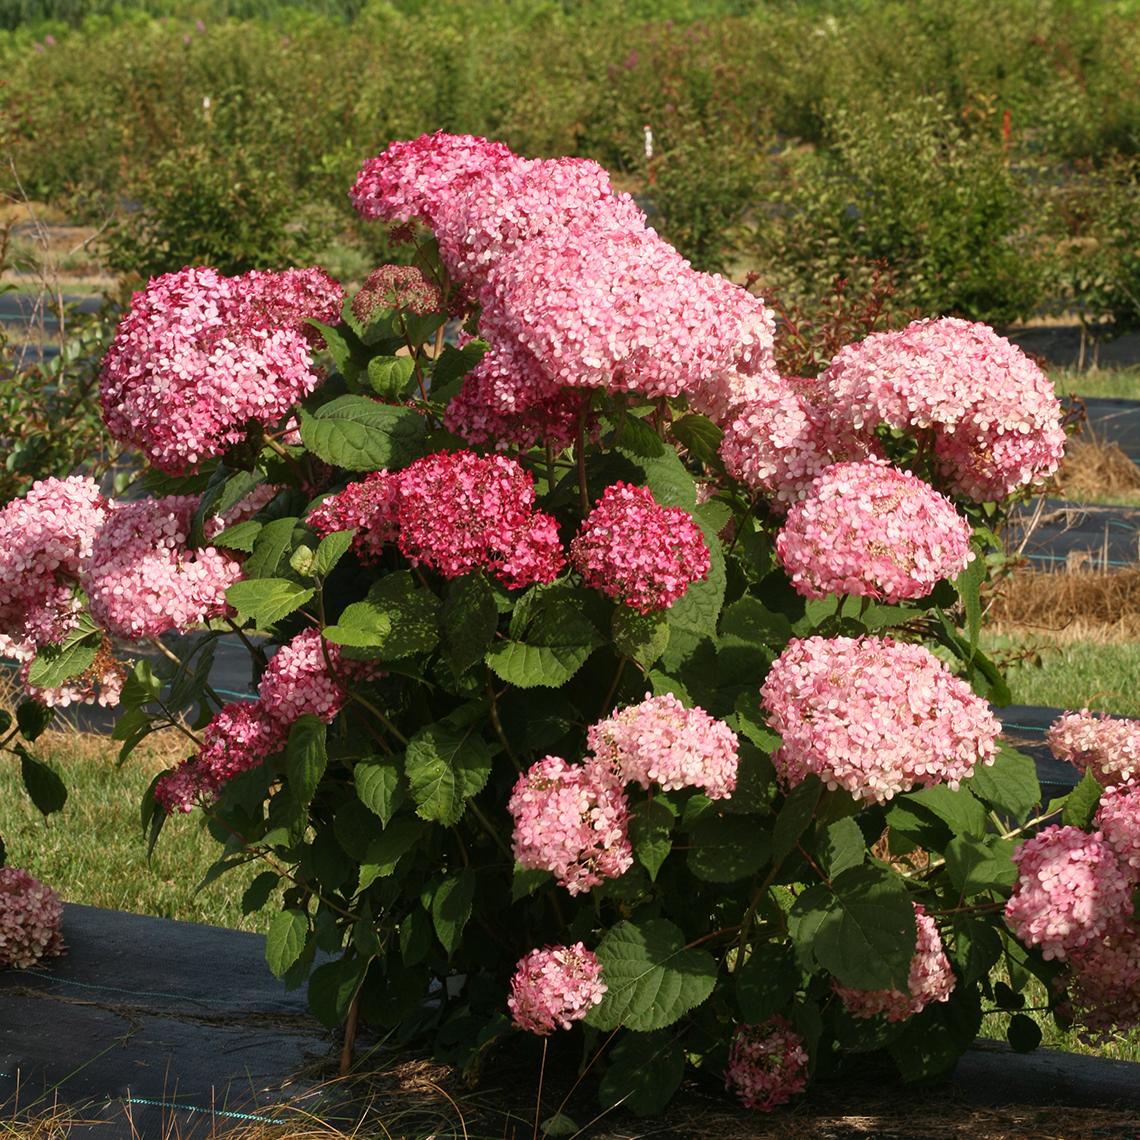 A single specimen of Invincibelle Spirit II hydrangea showing its pink blooms and strong stems